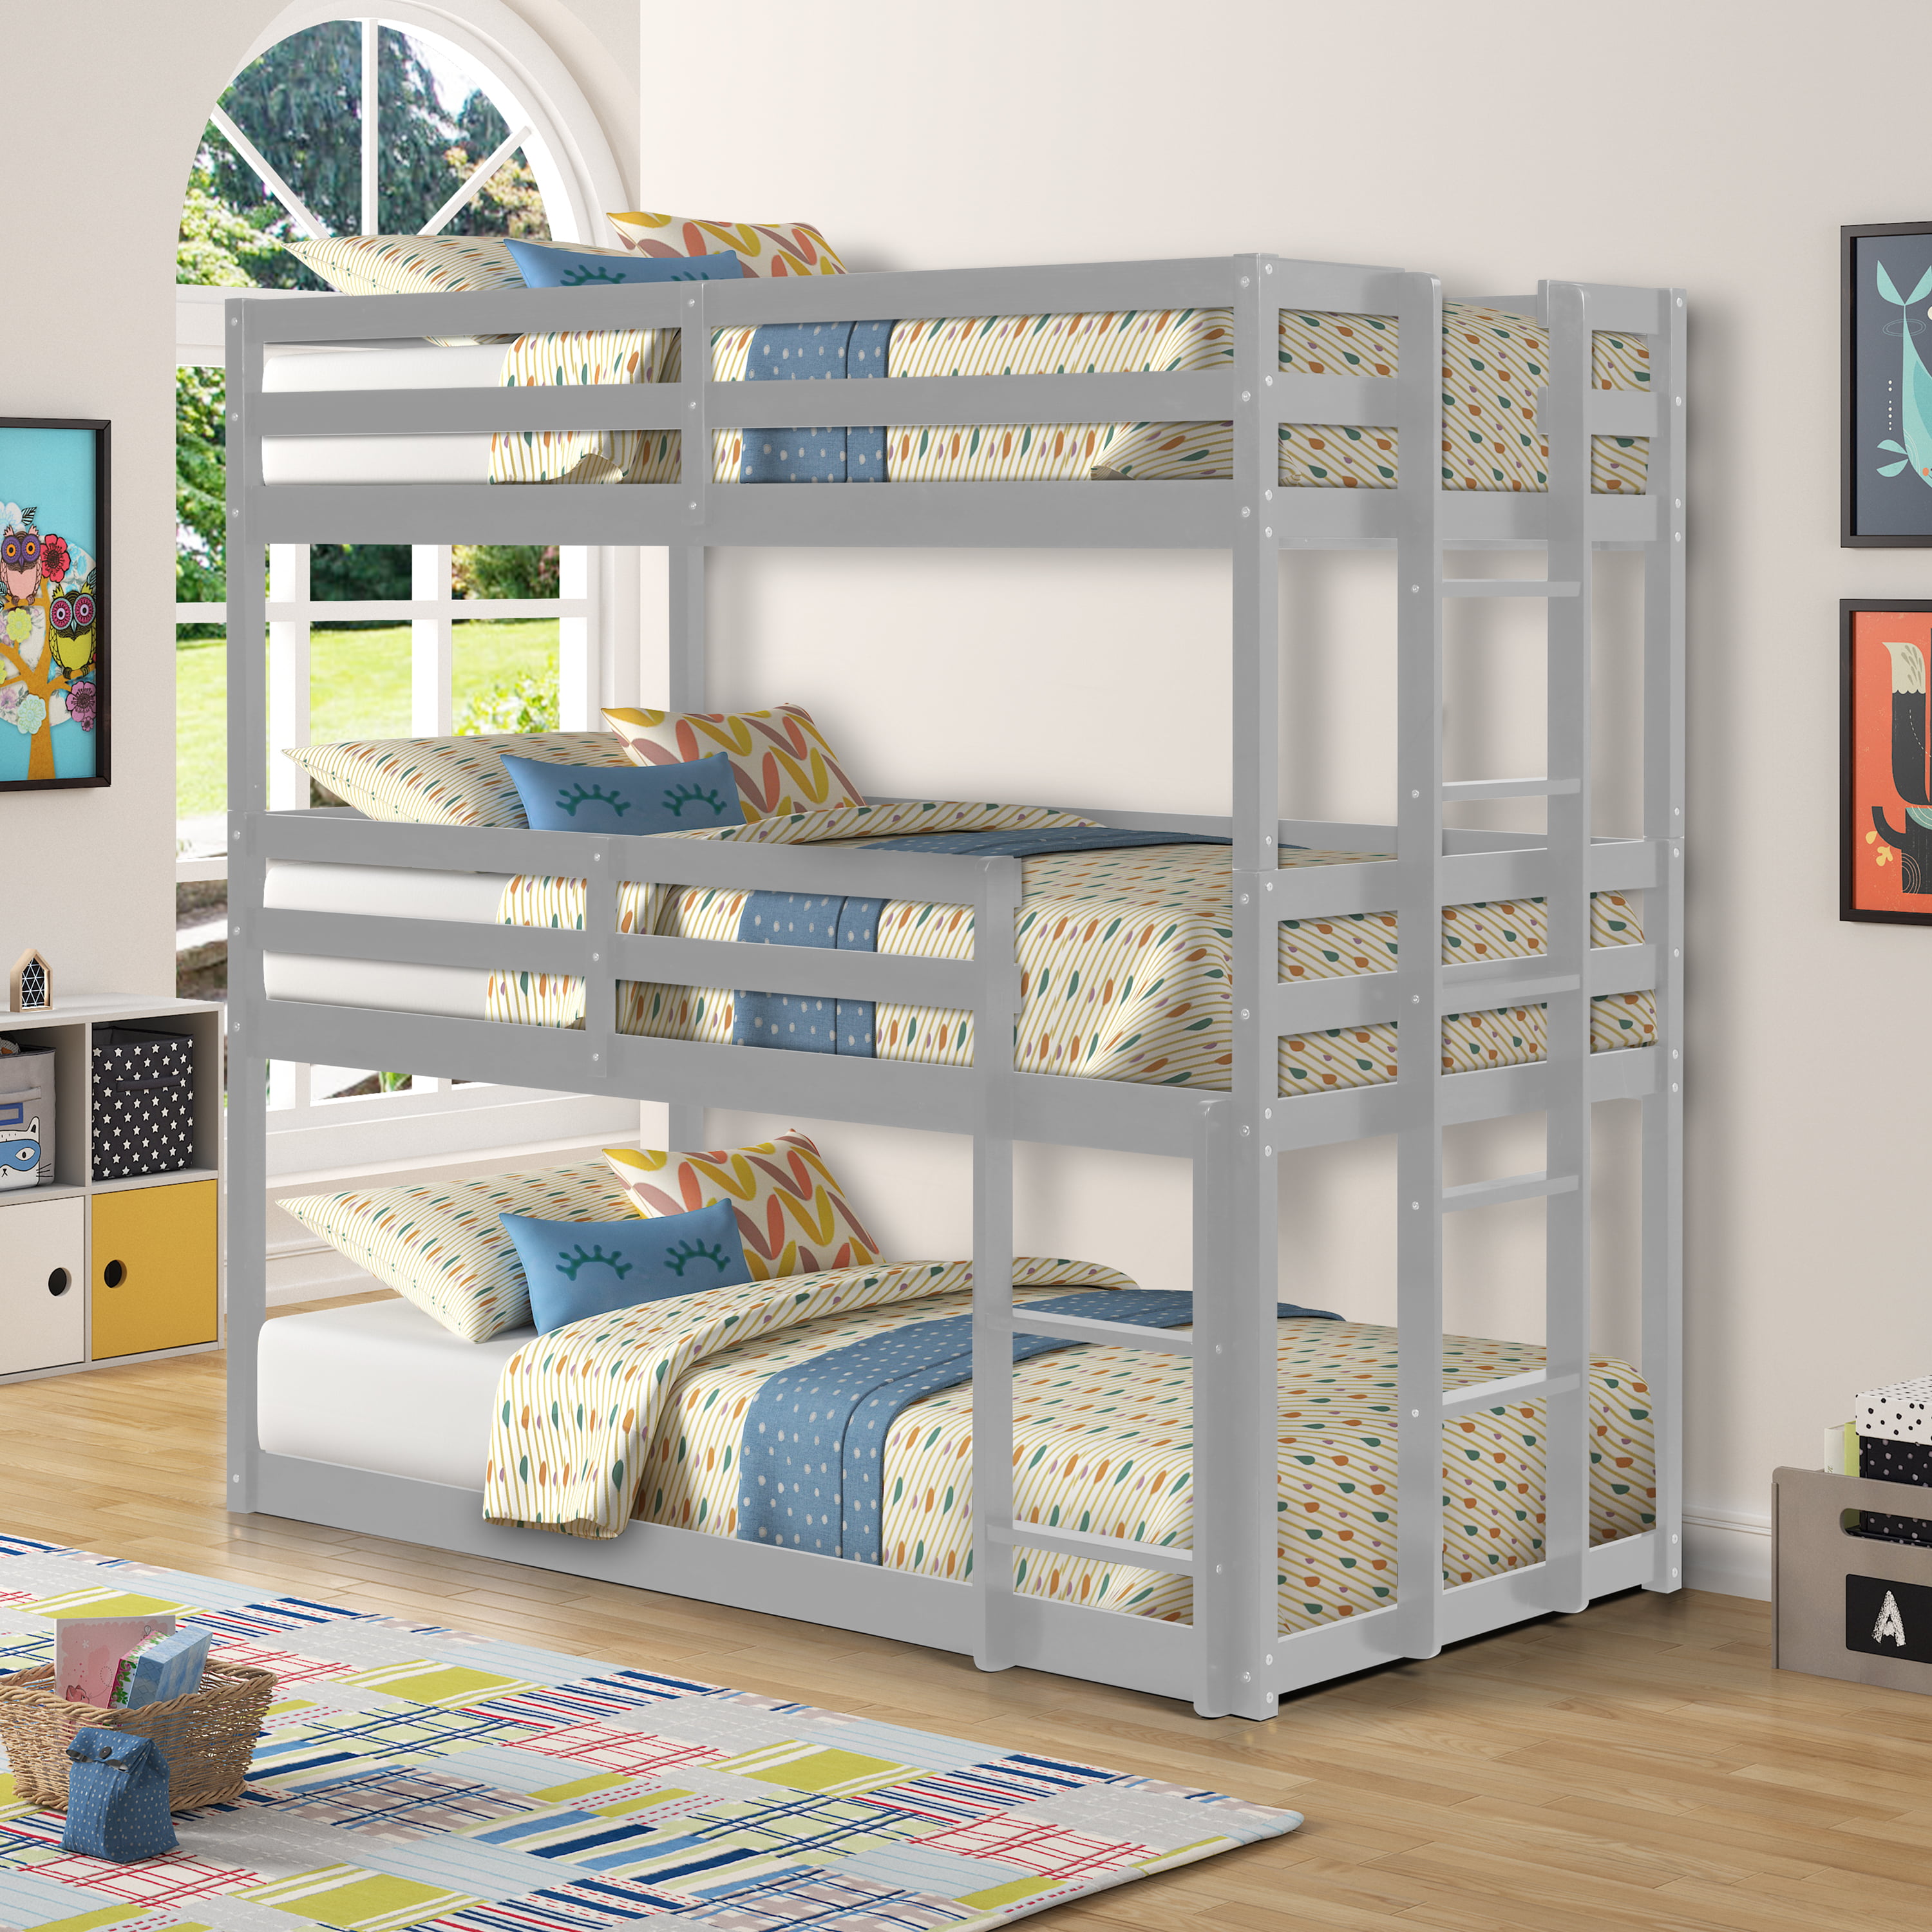 Jumper Triple Bunk Bed With Safety Rail, Bunk Bed Guard Rail